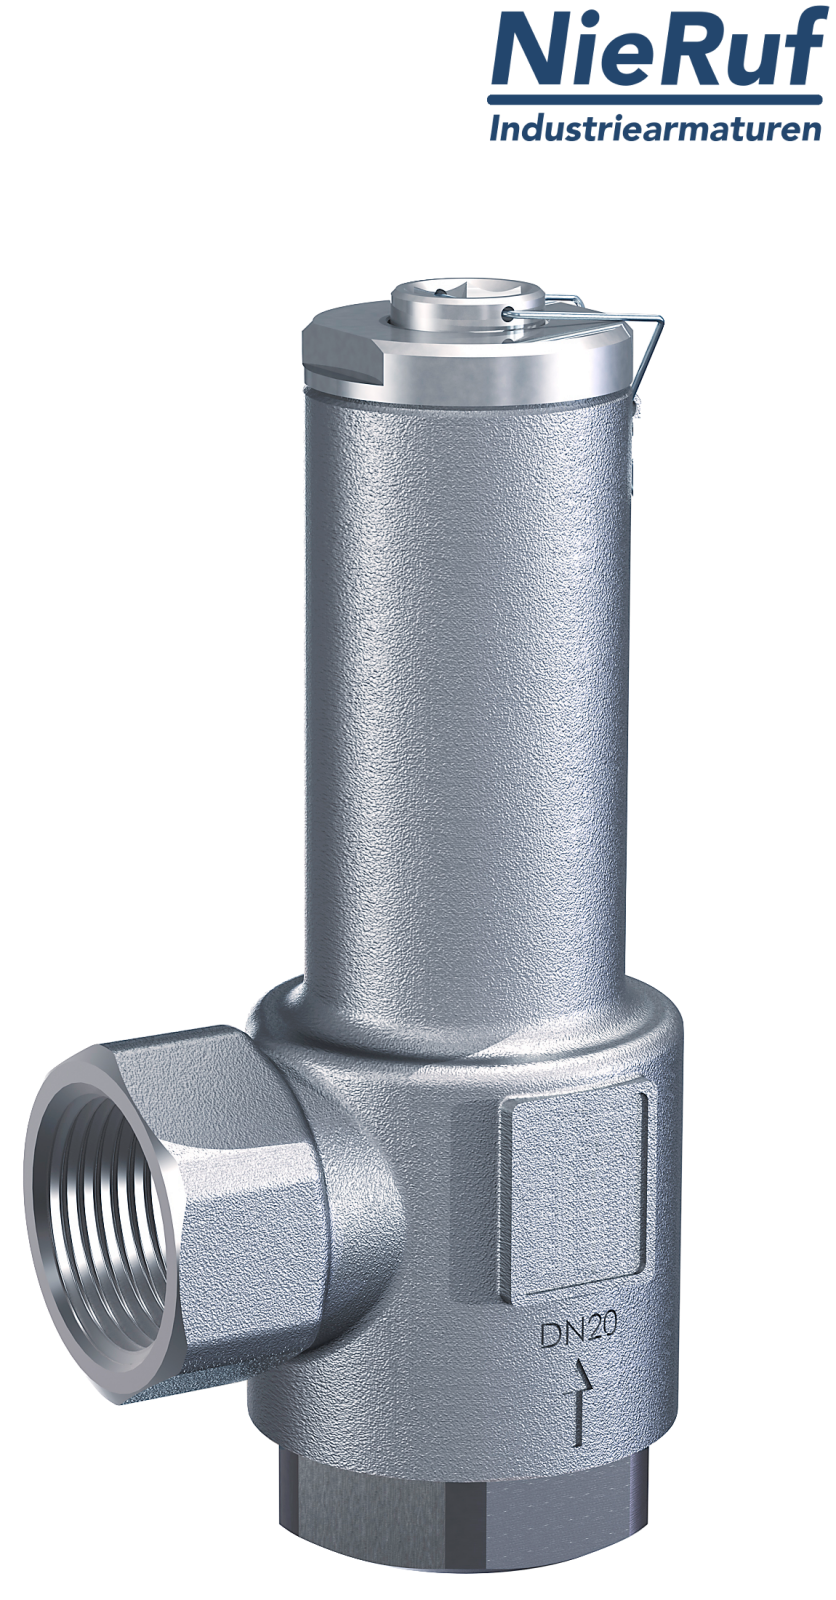 angle-type overflow valve 2" inch fm UV04 stainless steel AISI 316L 12 - 20 bar